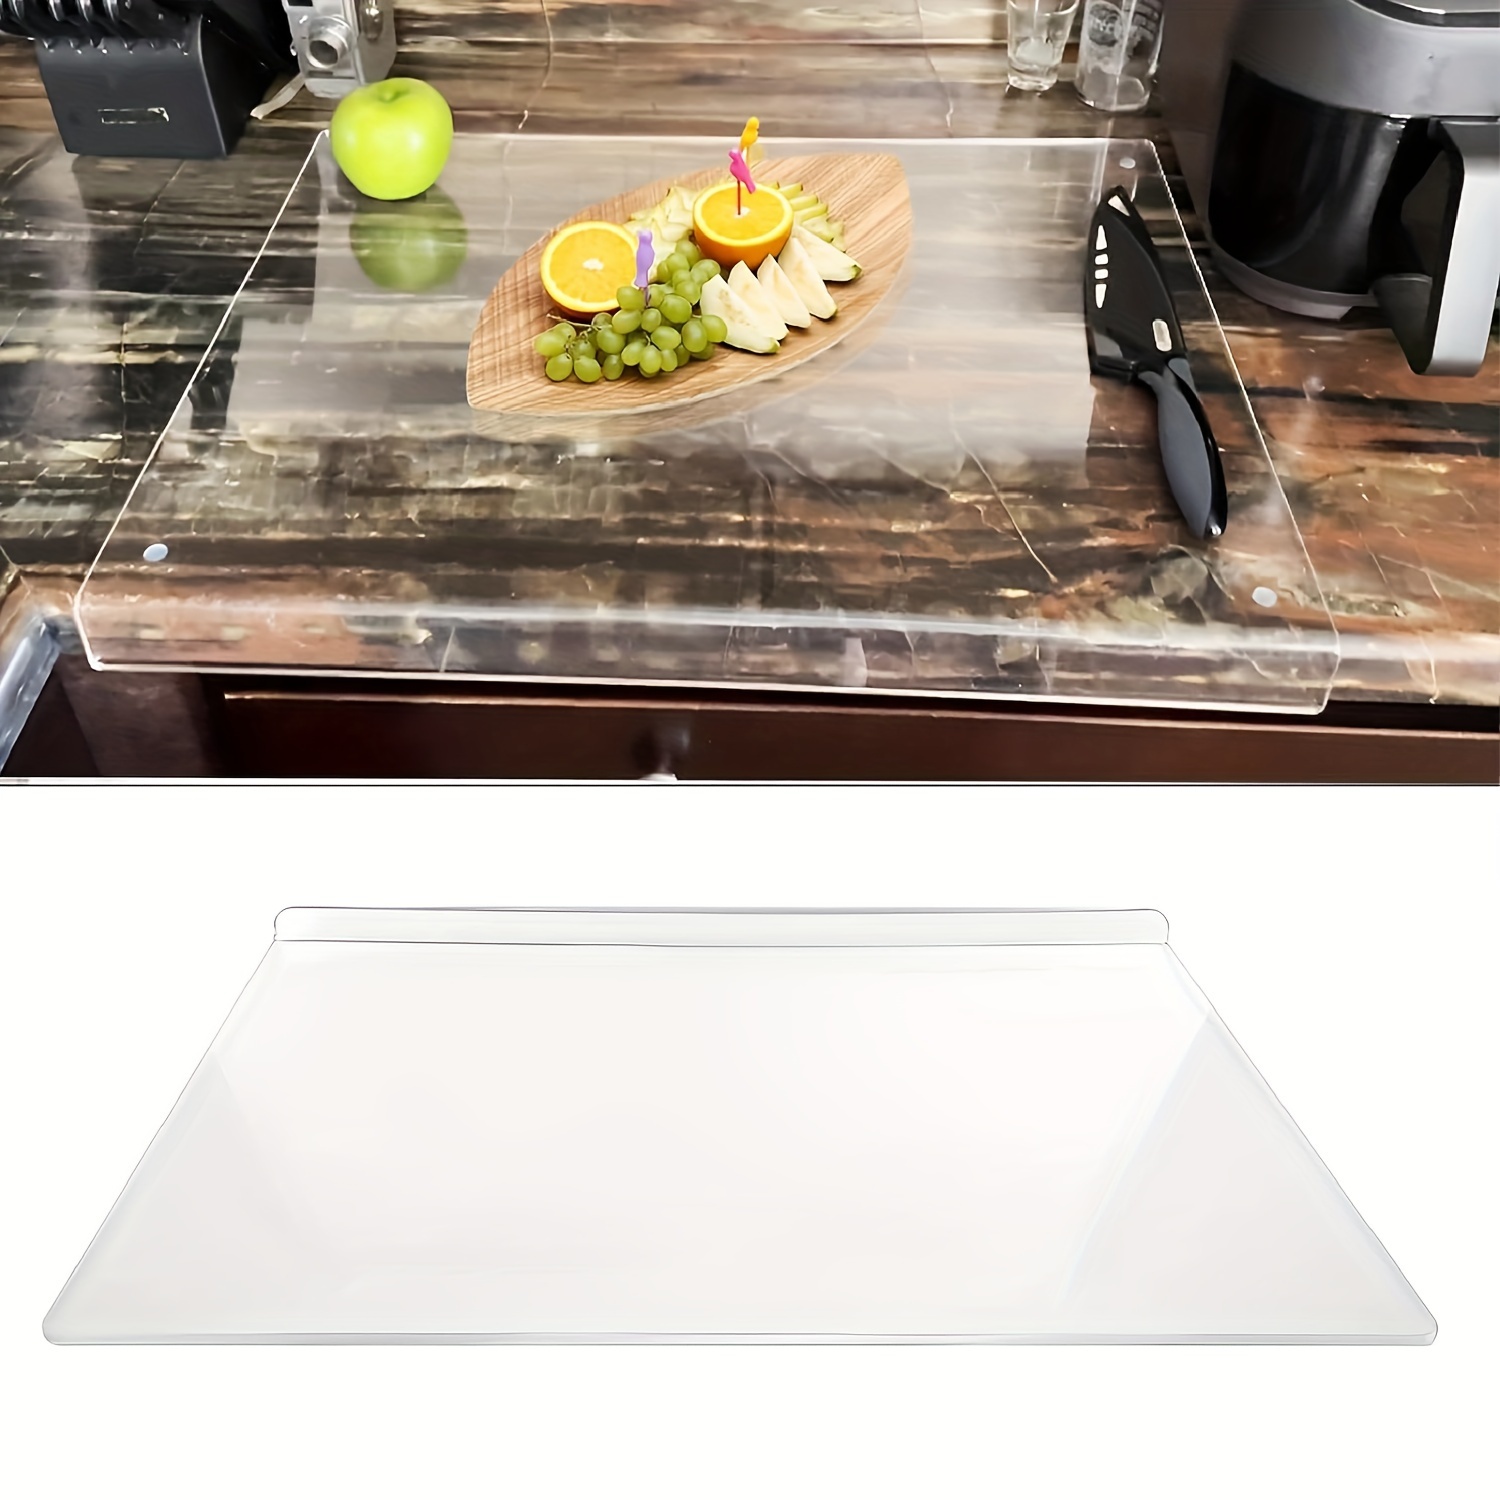 Acrylic Cutting Boards For Kitchen Counter, Acrylic Anti-slip